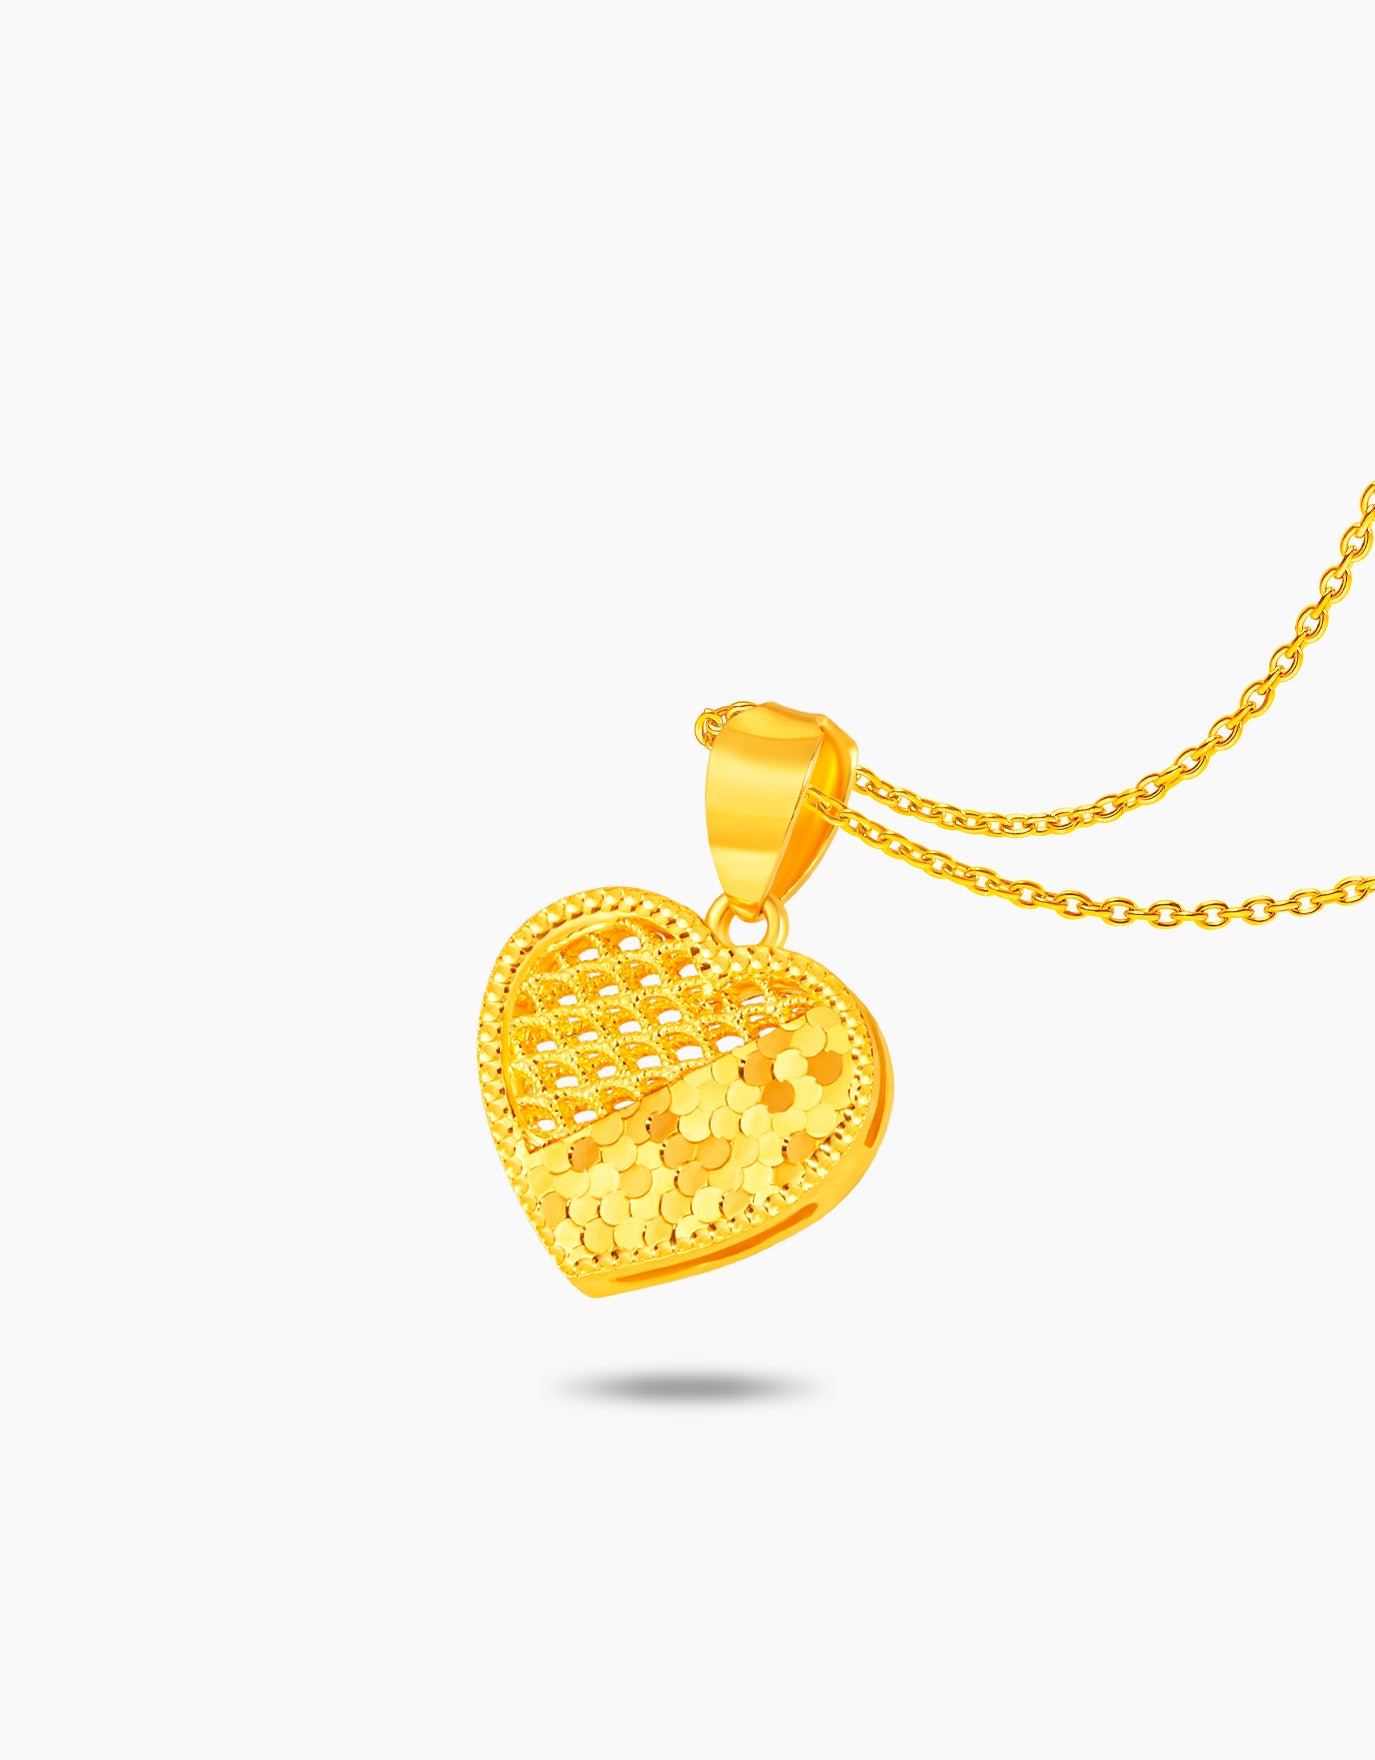 LVC 9IN Blessed Heart 999 Gold Pendant